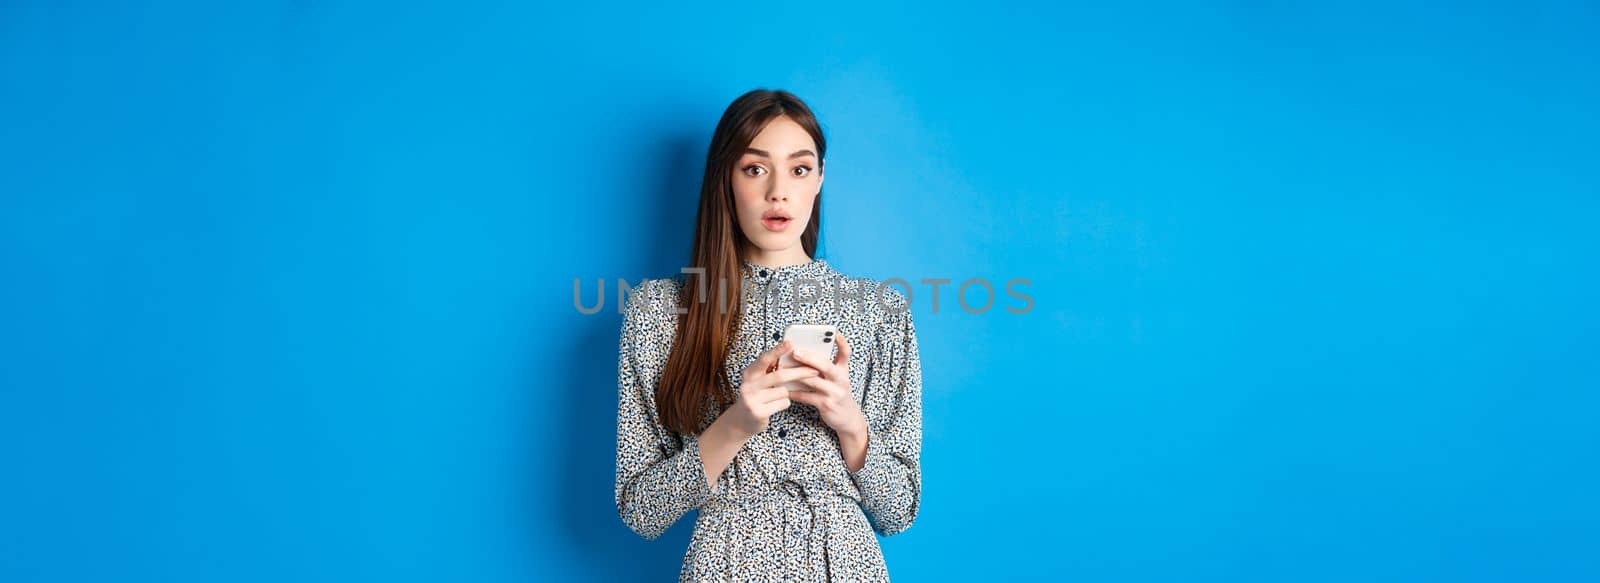 Woman look surprised after using mobile phone, standing on blue background.